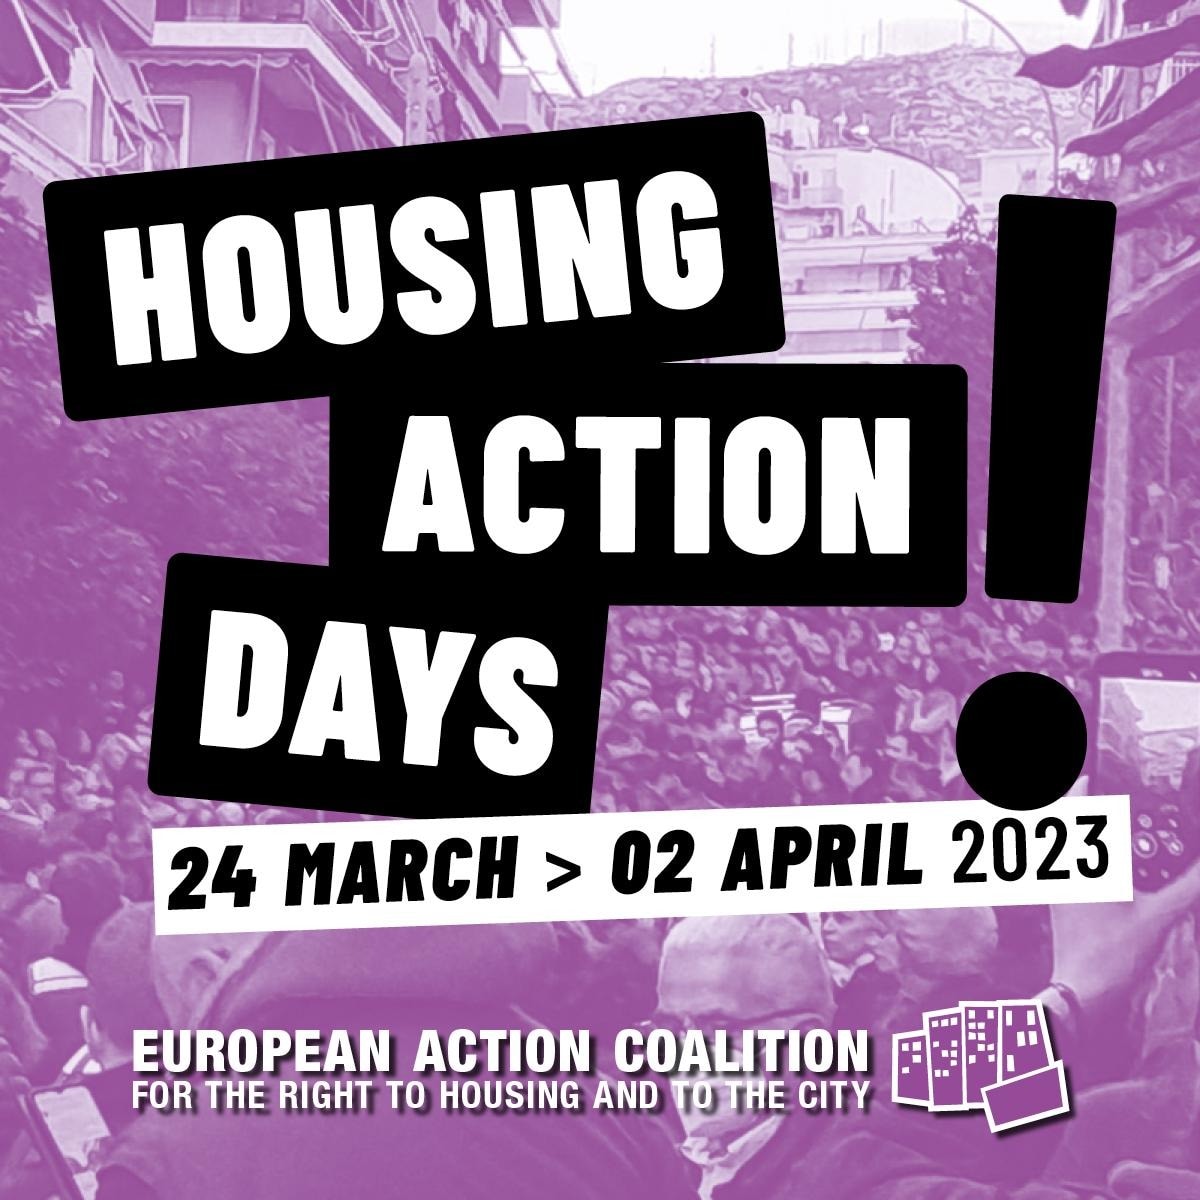 test Twitter Media - 💥Call to #action! From the 25th of March until the 2nd of April 2023, we will take the streets all over Europe for the right to housing, the right to the city.
🔊Become a part of it: organise, mobilise and join the #HAD2023 in your city!🔥
Info: https://t.co/t66eInKPBM https://t.co/B43UTUlcSh